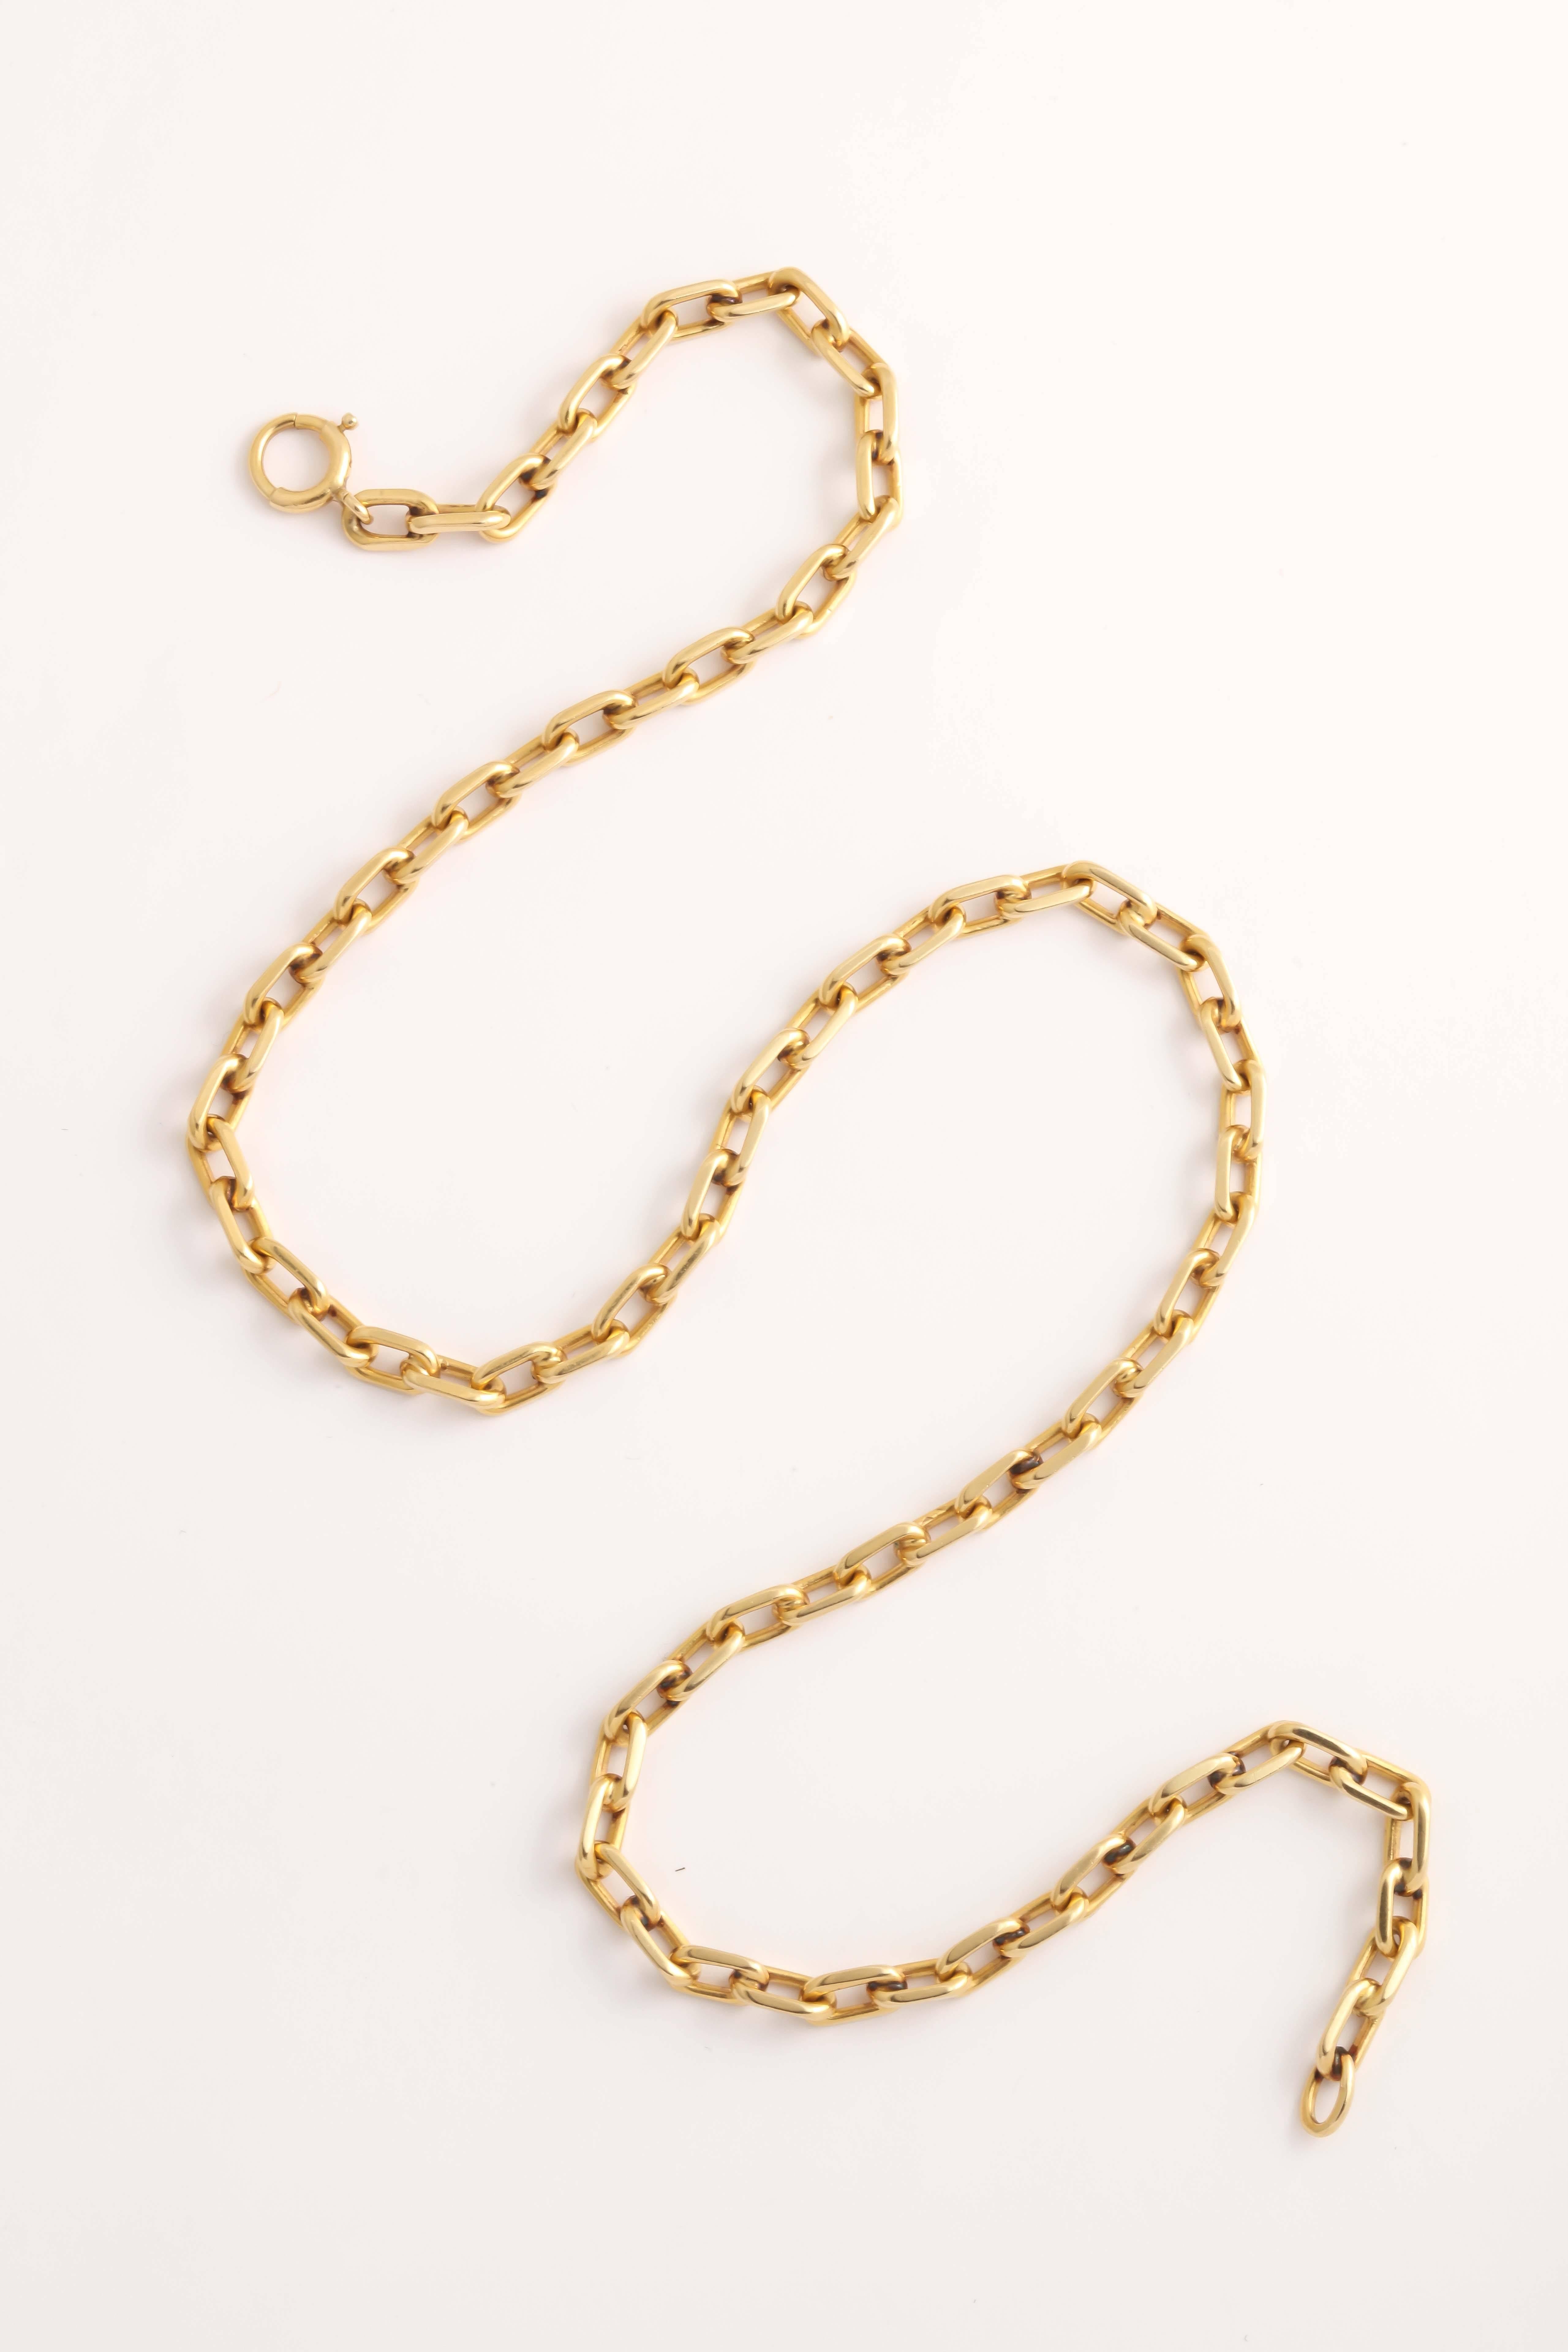 Classic simple chain link, perfect for gentleman or lady.  It is beautifully made and in excellent condition.
Impressed TIFFANY & CO/ 14kt.

18 ¼” long;  links are 4 mm. wide.
1.15 ozs.